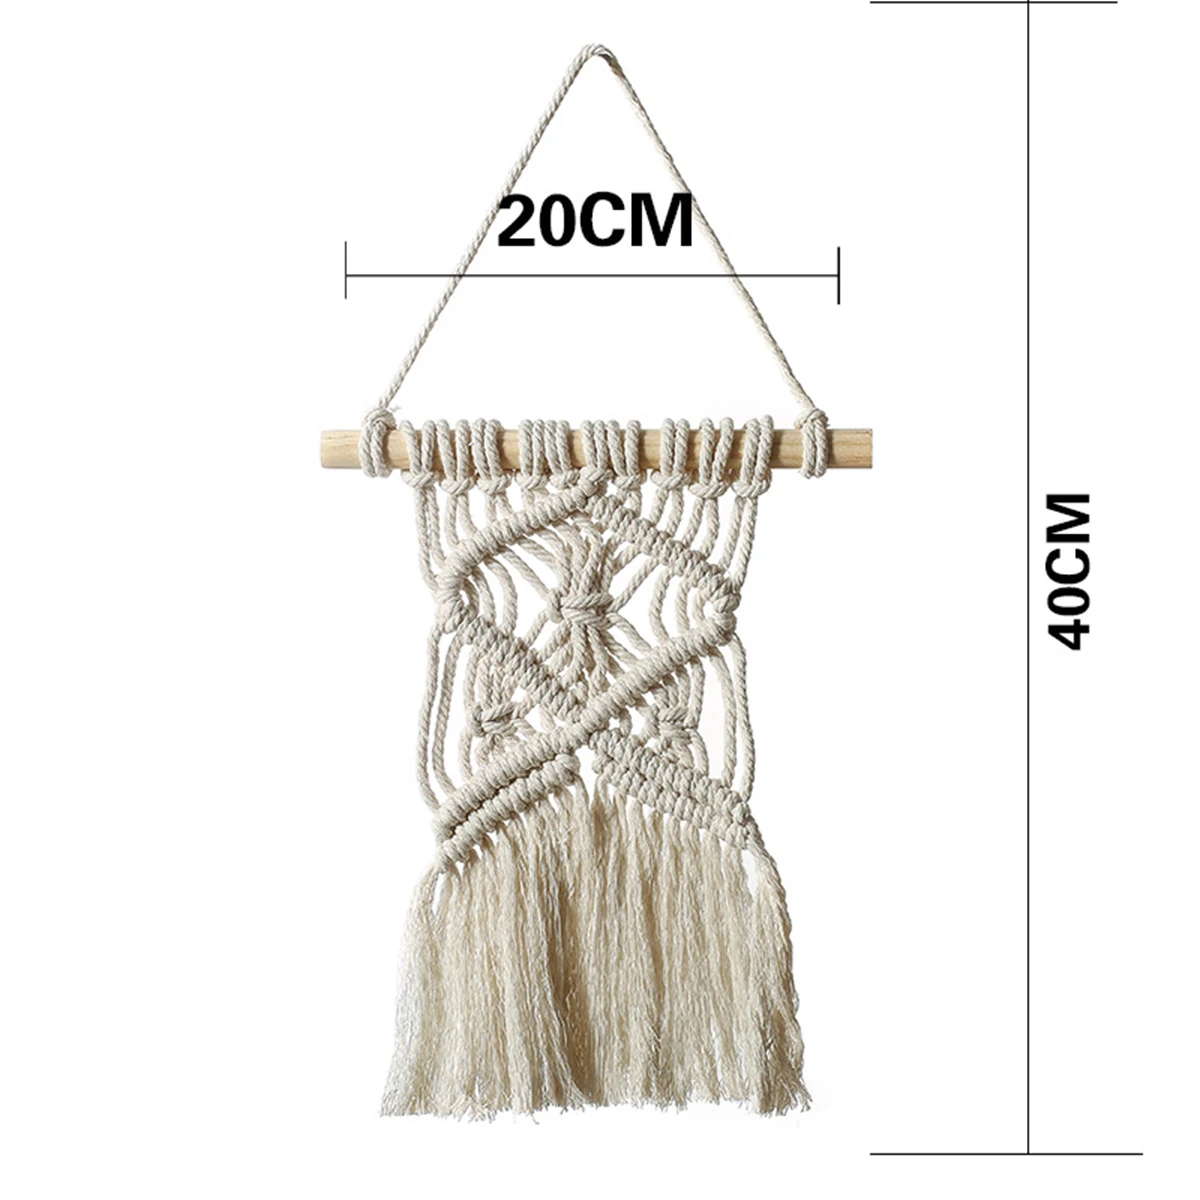 

Faroot Wall Decoration Weaving Dream Net Tapestry Tassels Decorate Hanging Living Room Home Furnishing Ornament Pendant